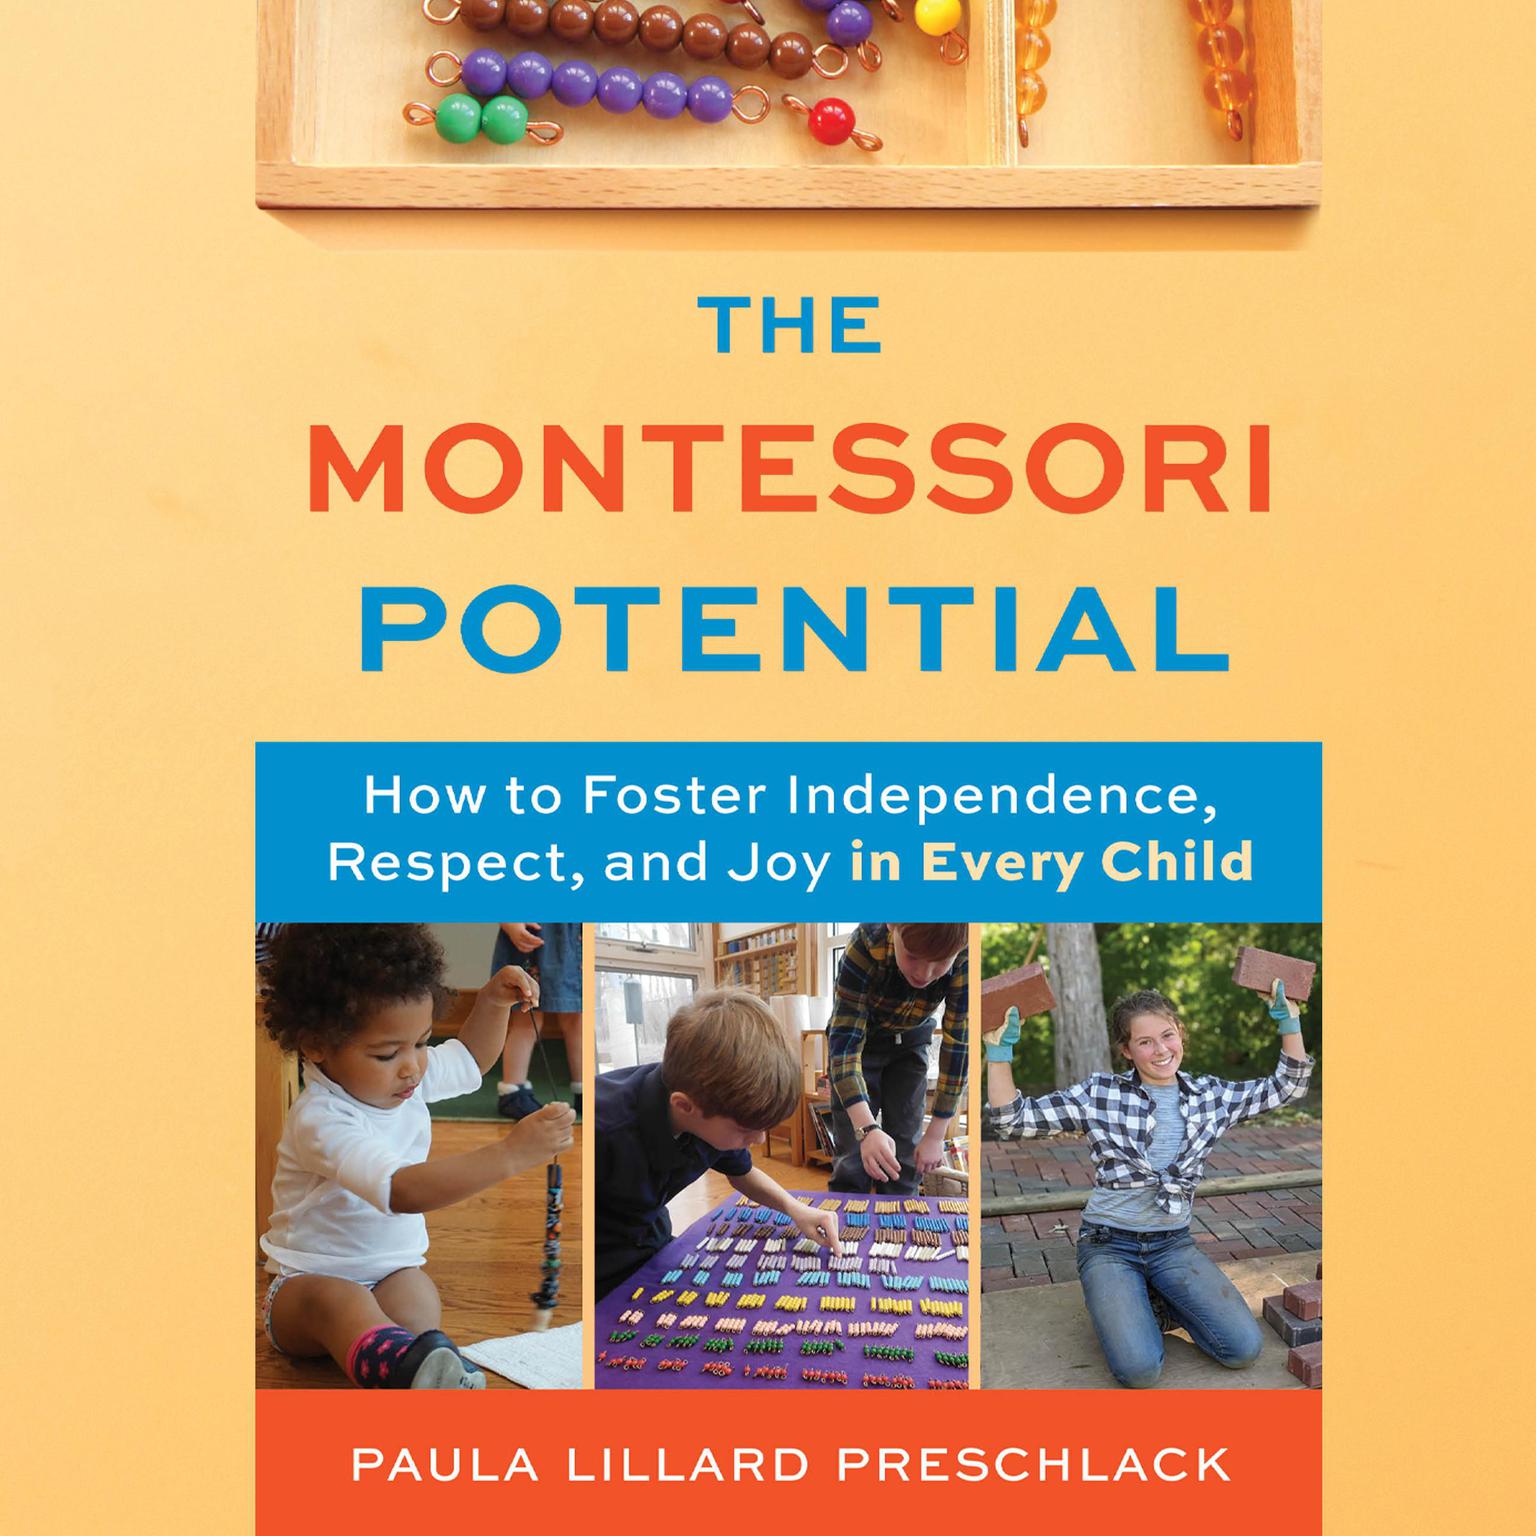 The Montessori Potential: How to Foster Independence, Respect, and Joy in Every Child Audiobook, by Paula Lillard Preschlack